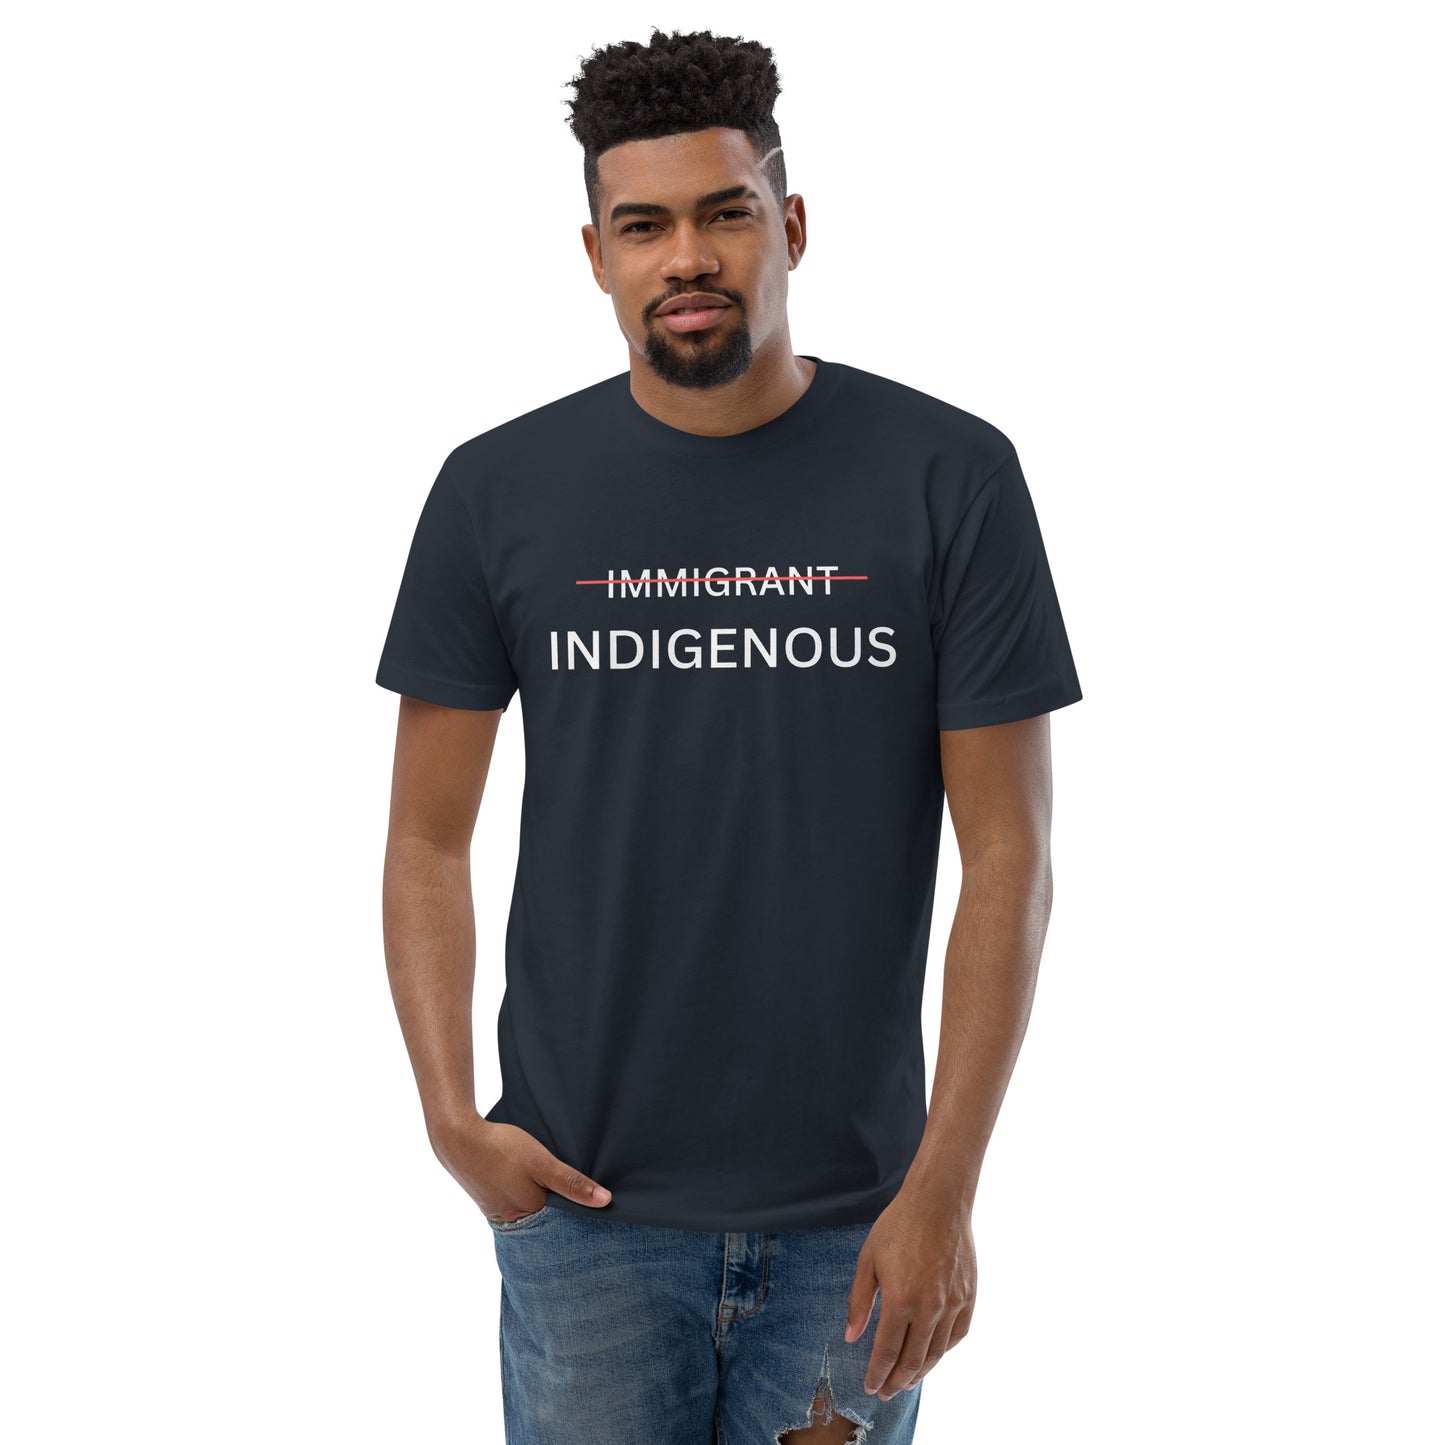 Fitted Men's Indigenous peoples